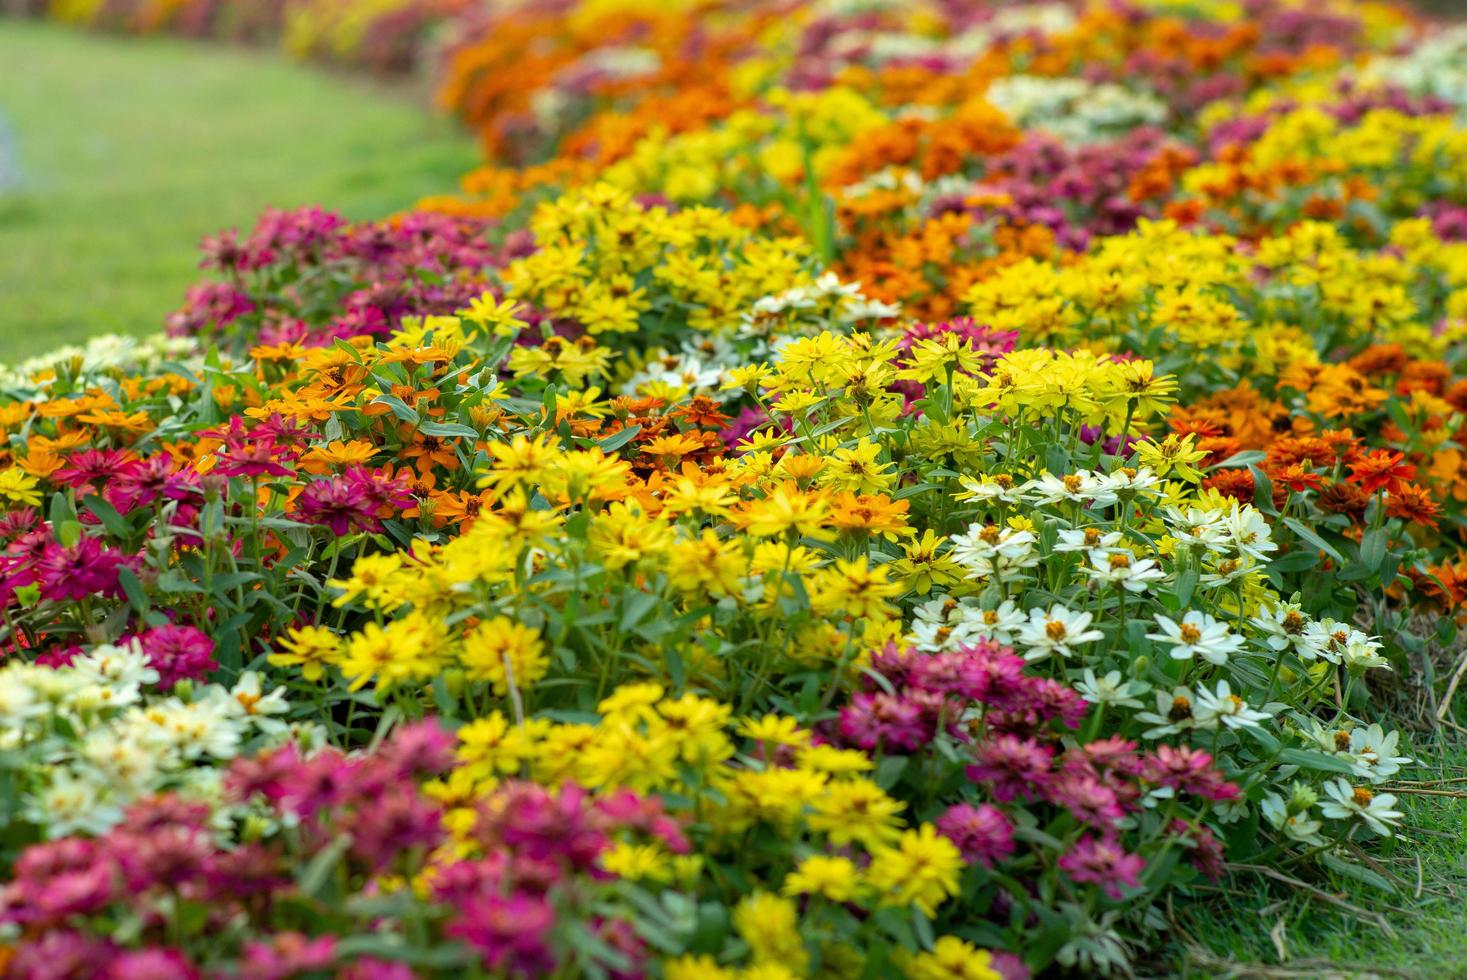 Landscape of blossom colorful flowers in the garden photo